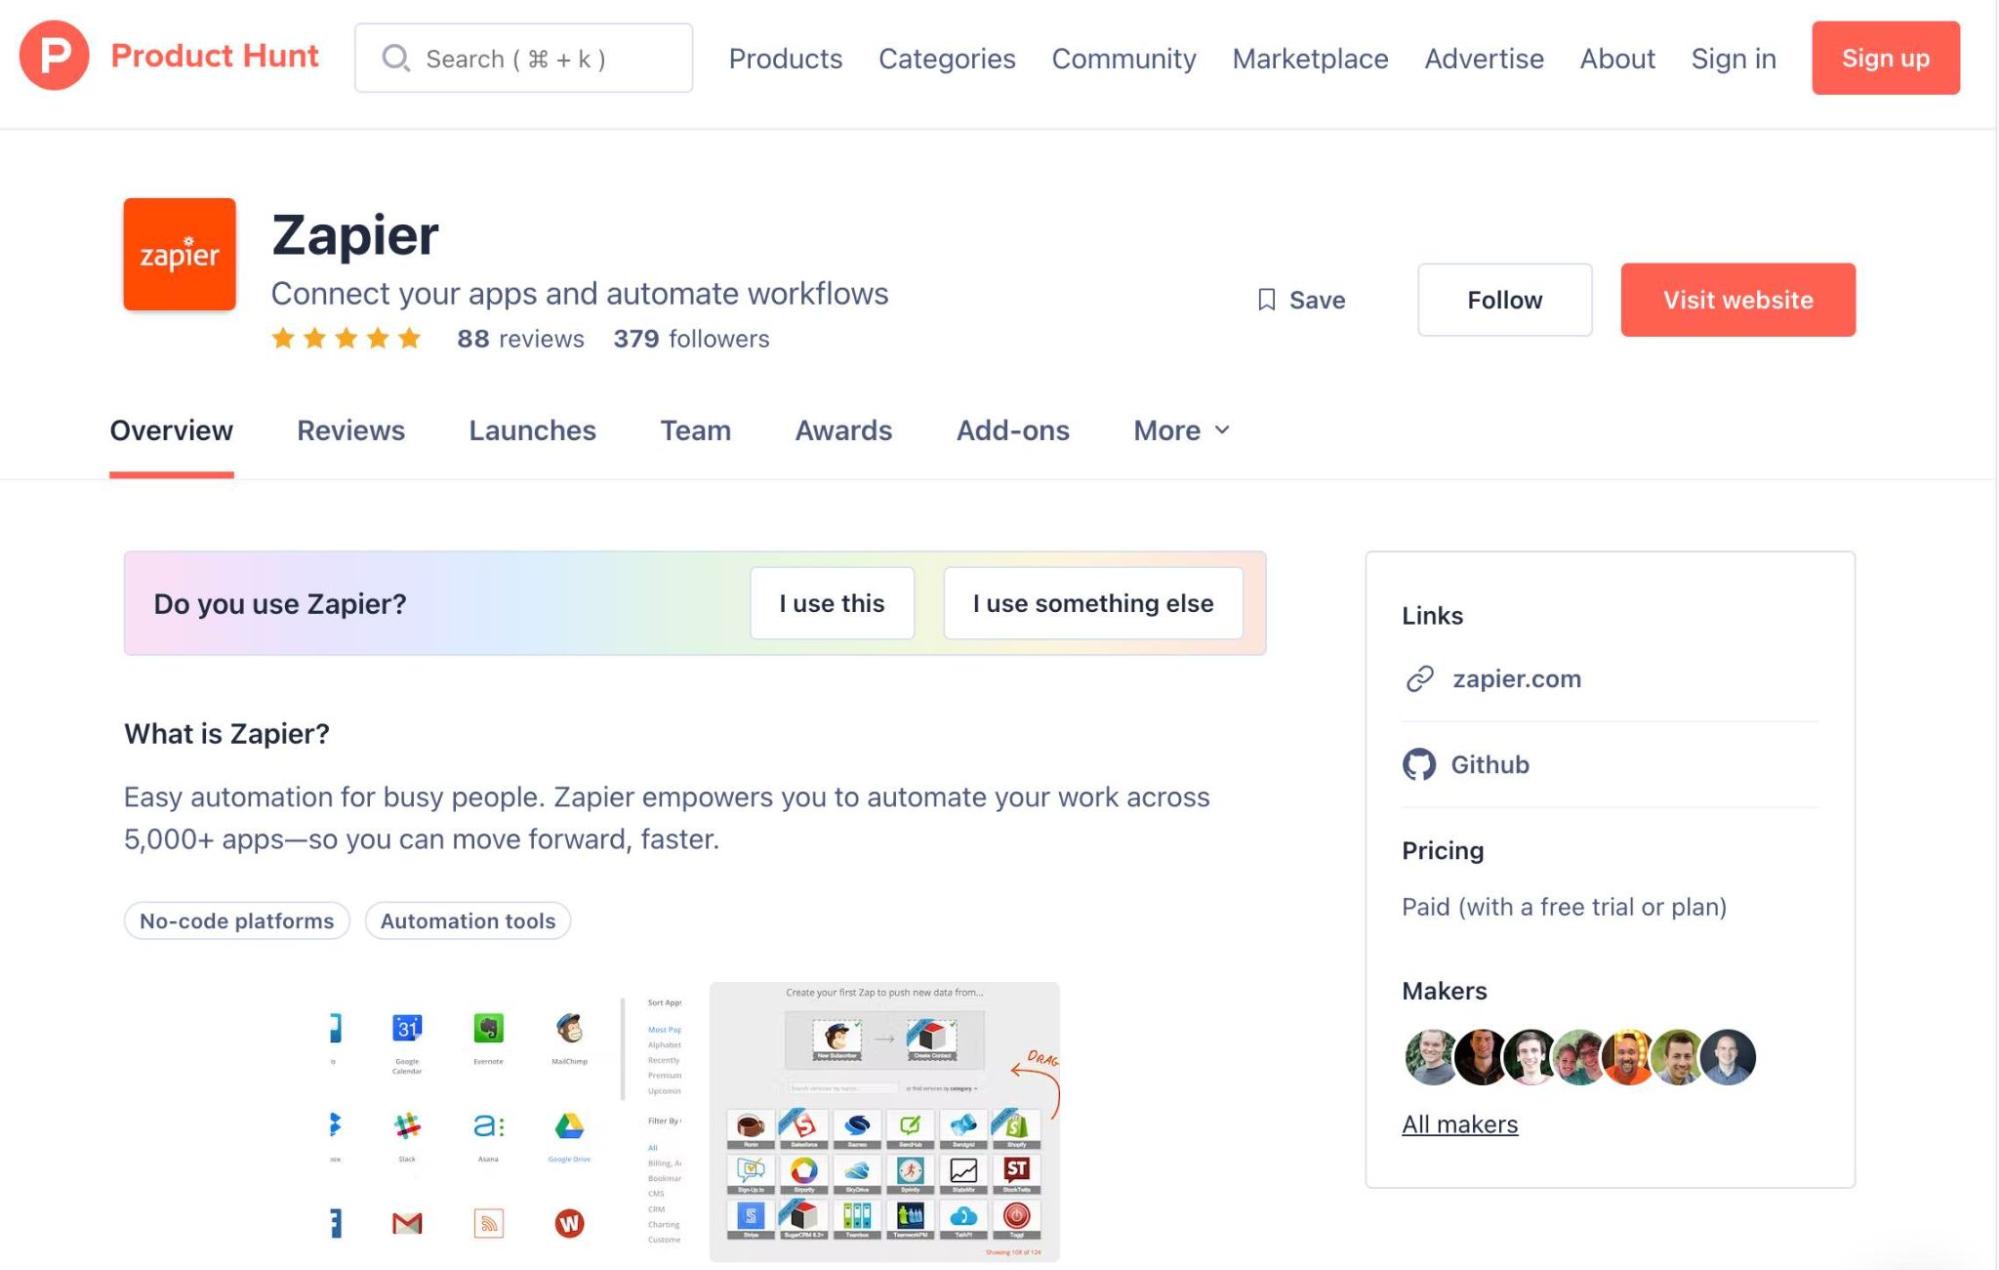 Zapier's overview section on Product Hunt